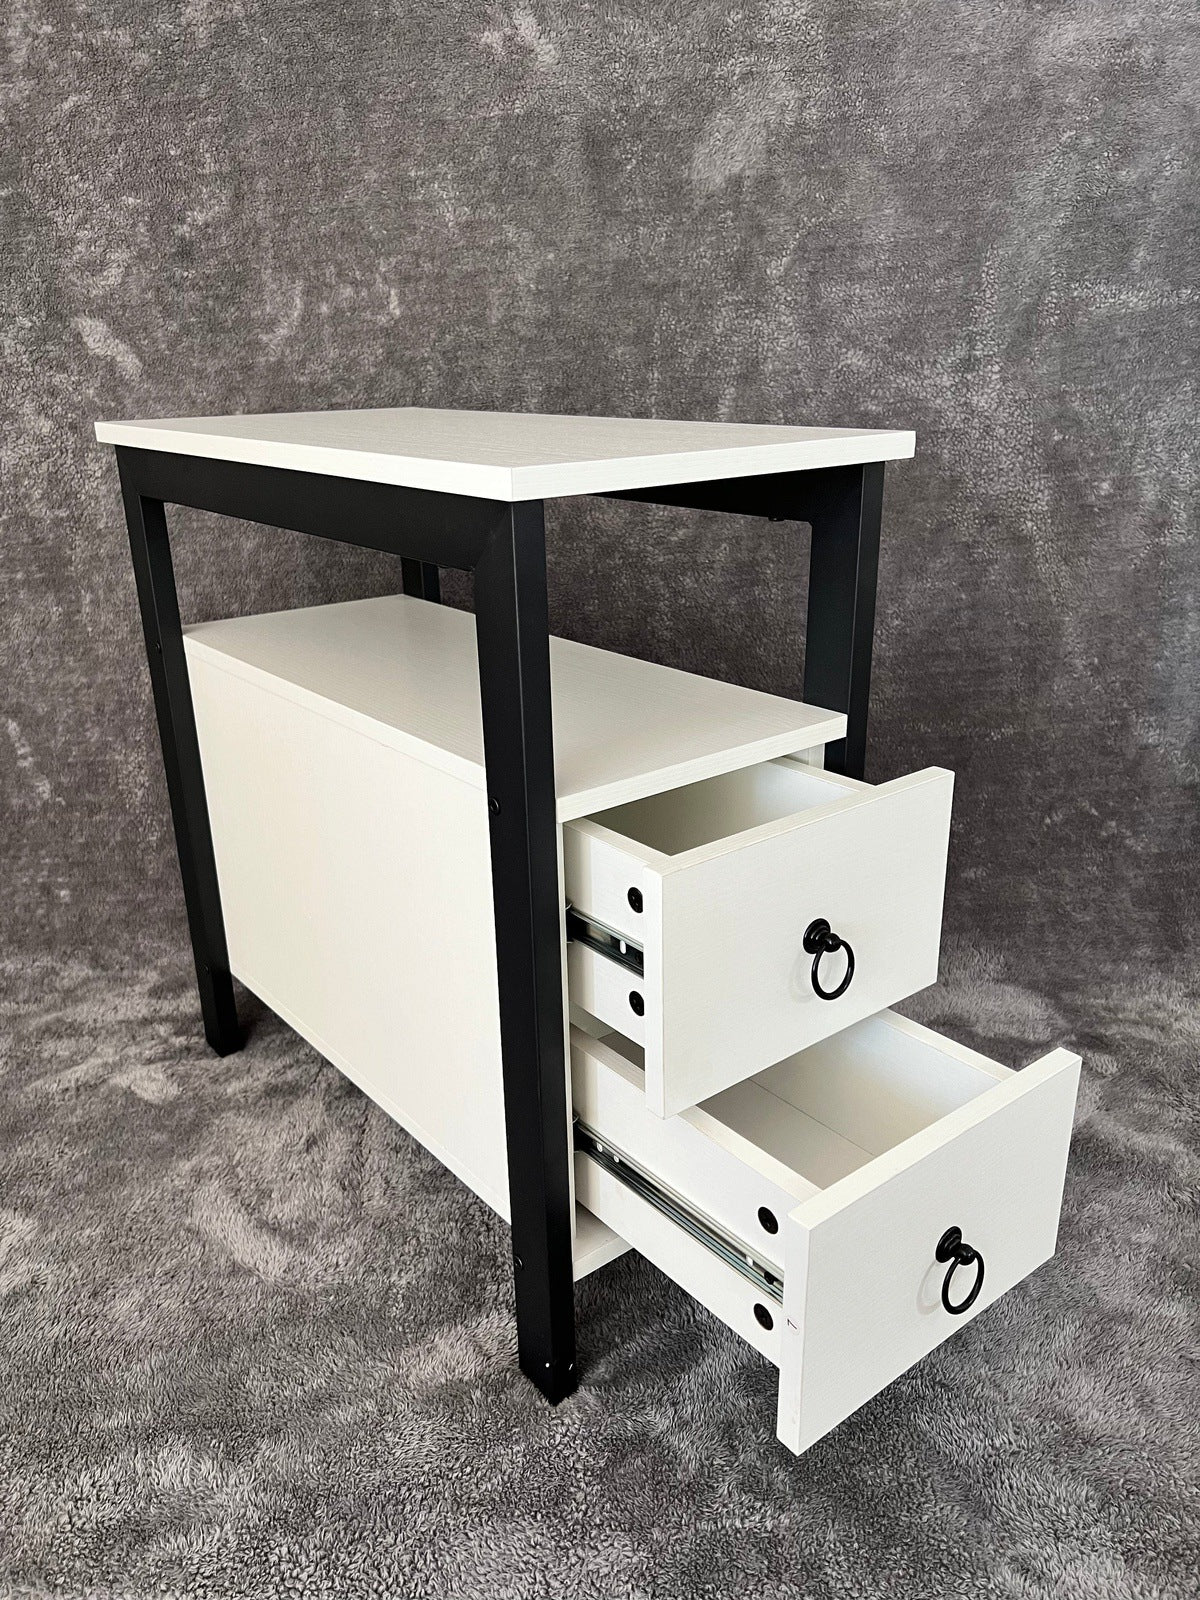 【LA000322】Modern Industrial Style White Nightstand with 2 Drawers